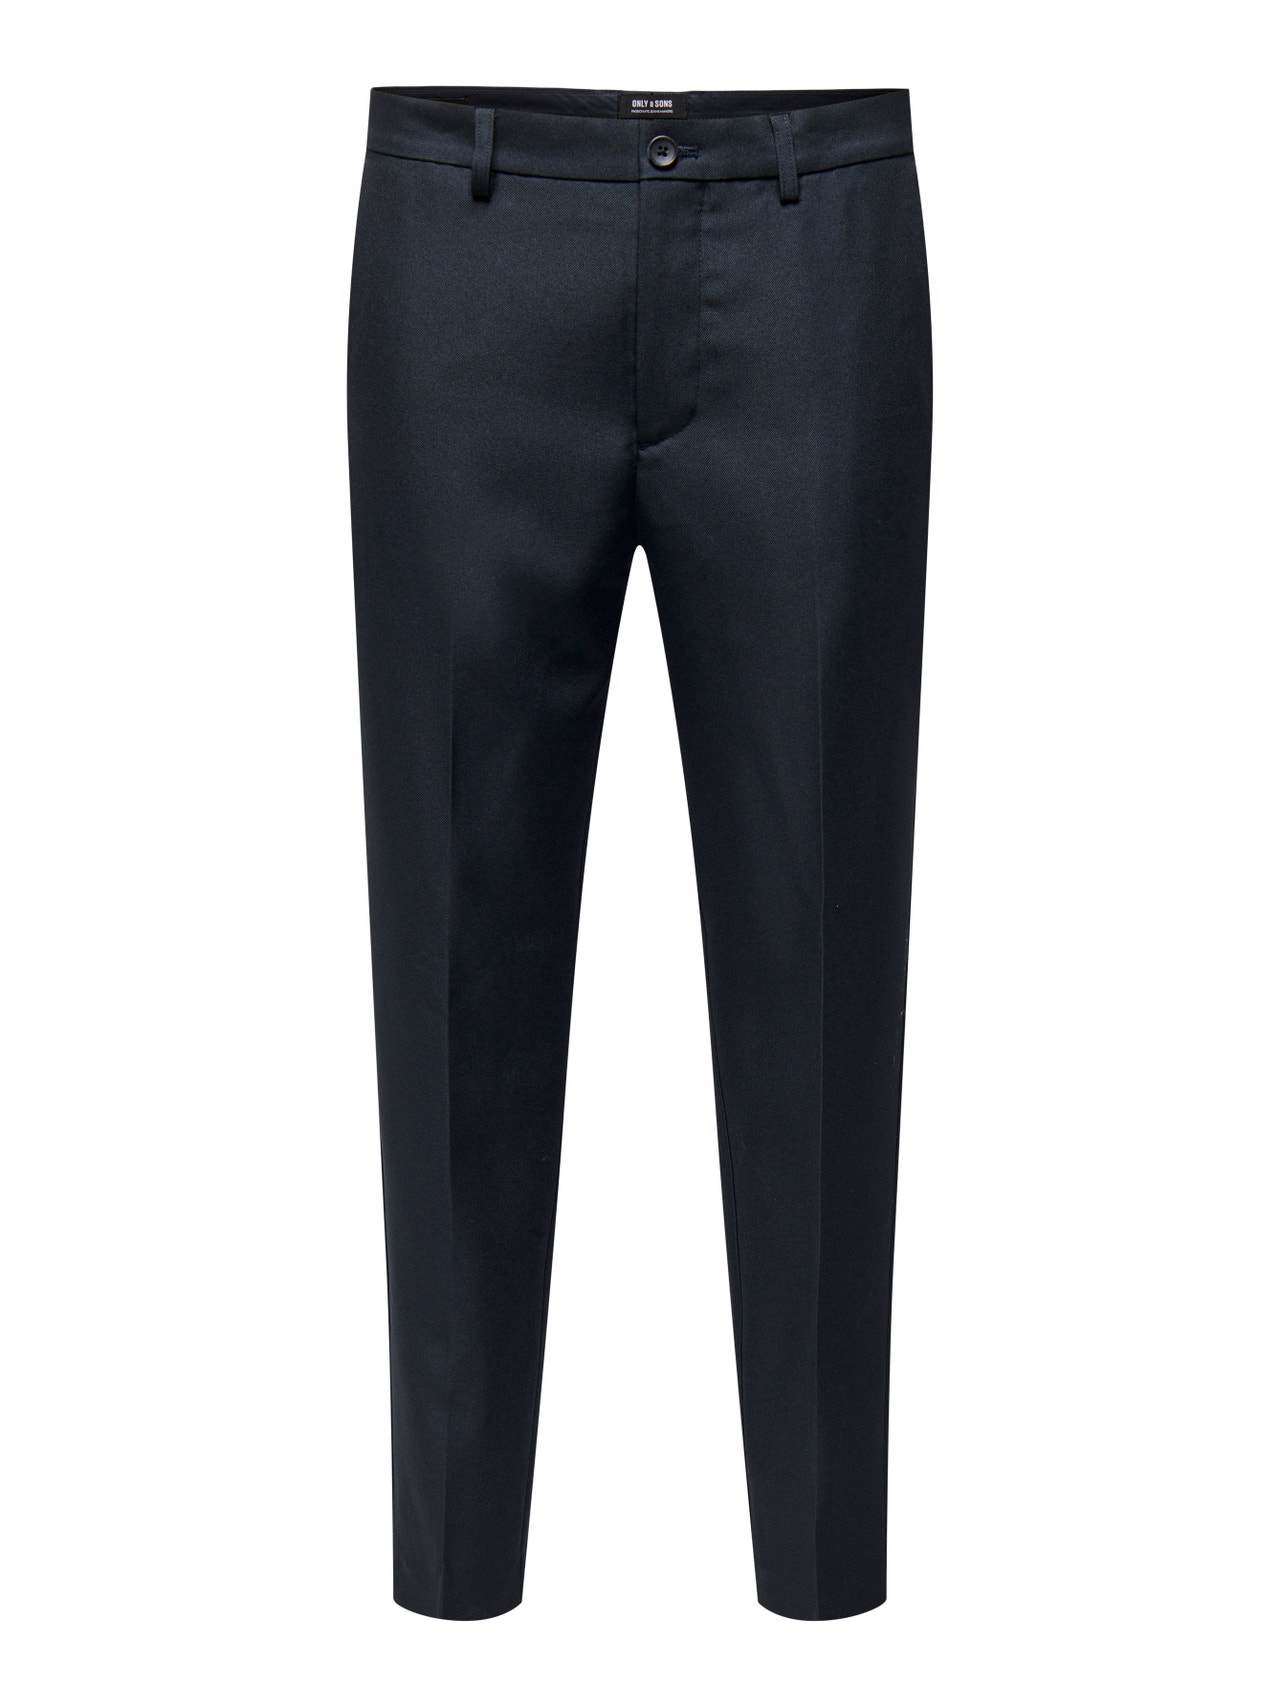 ONLY & SONS Slim Fit Tailored Trousers -Dark Navy - 22026243